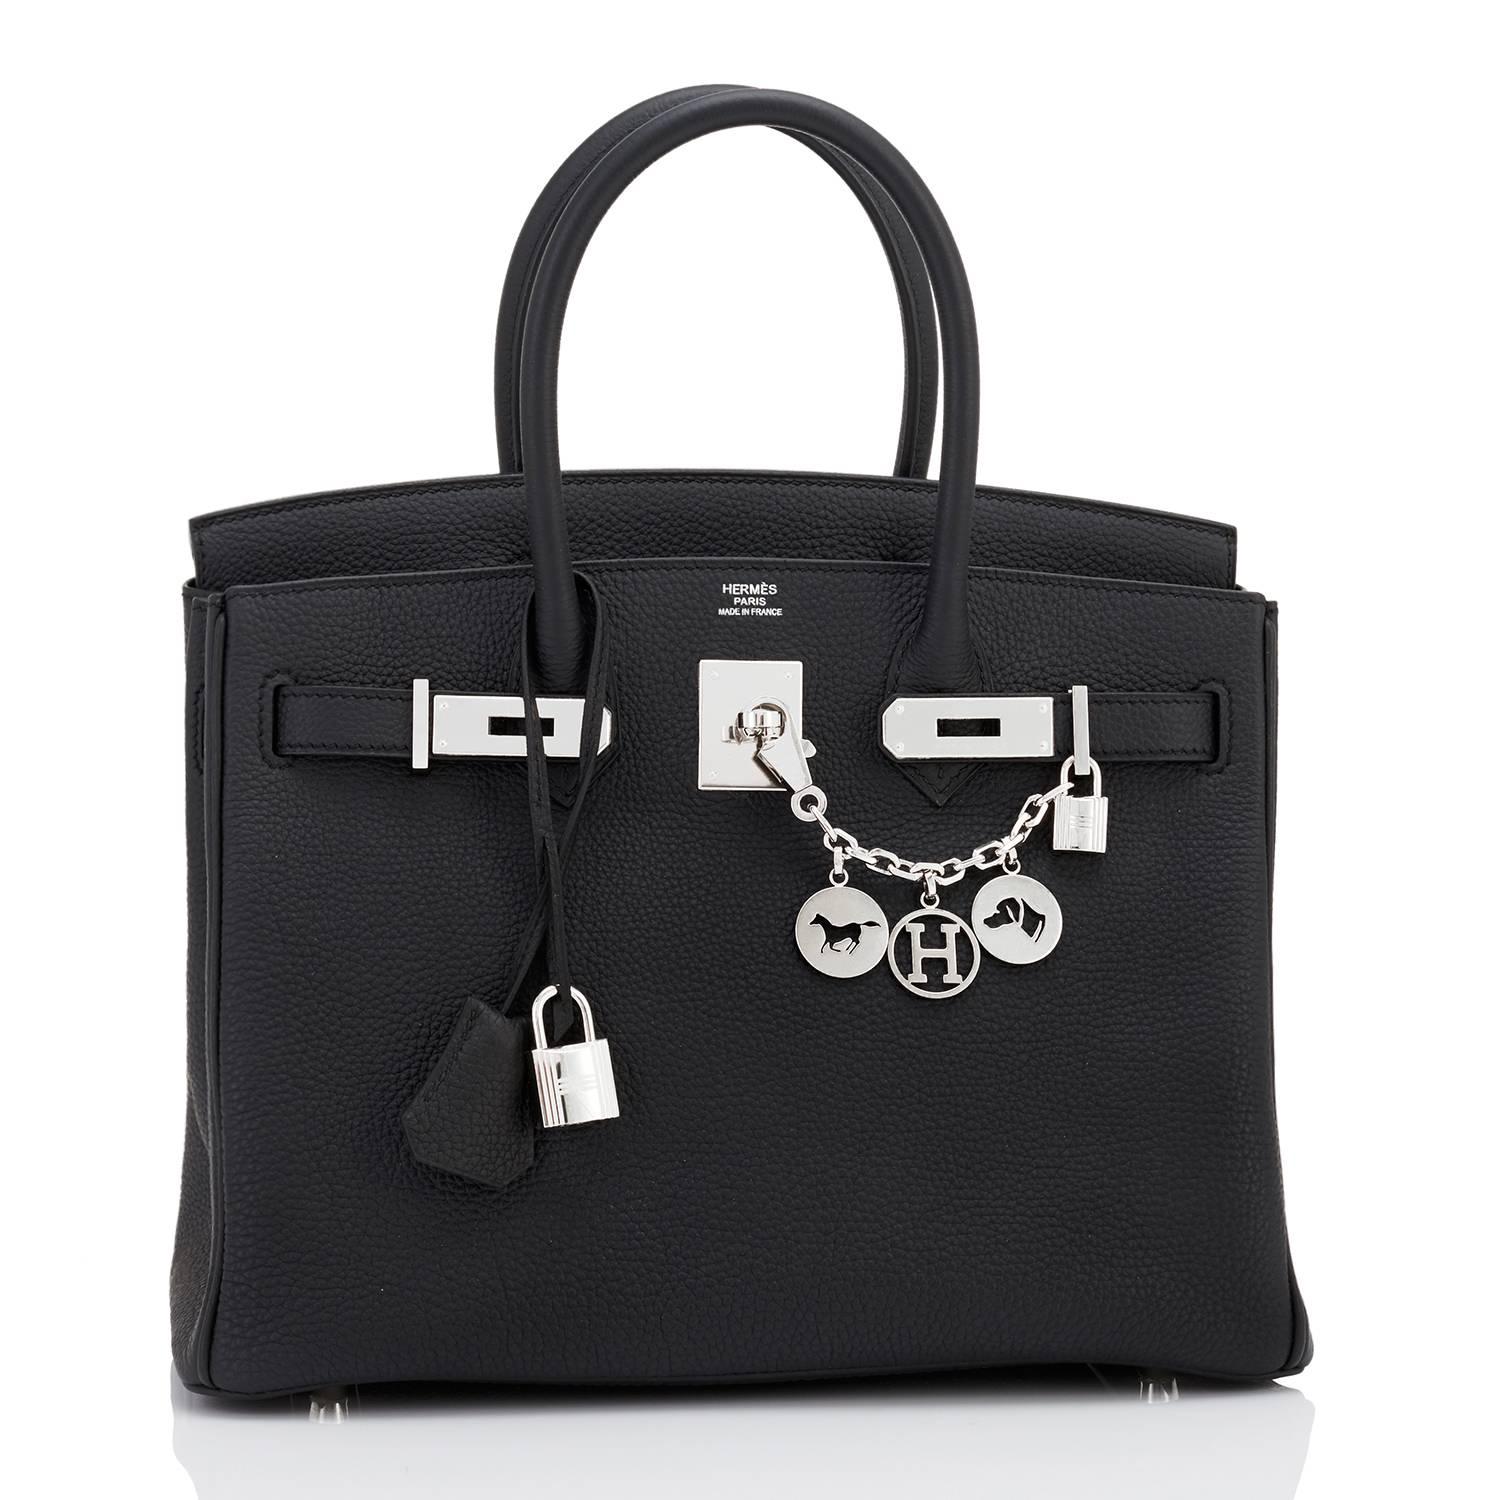 Hermes Black Togo 30cm Birkin Palladium Hardware Leather Bag 
Brand New in Box. Store fresh. Pristine condition (with plastic on hardware)
Perfect gift!  Comes with keys, lock, clochette, a sleeper for the bag, rain protector, and signature orange